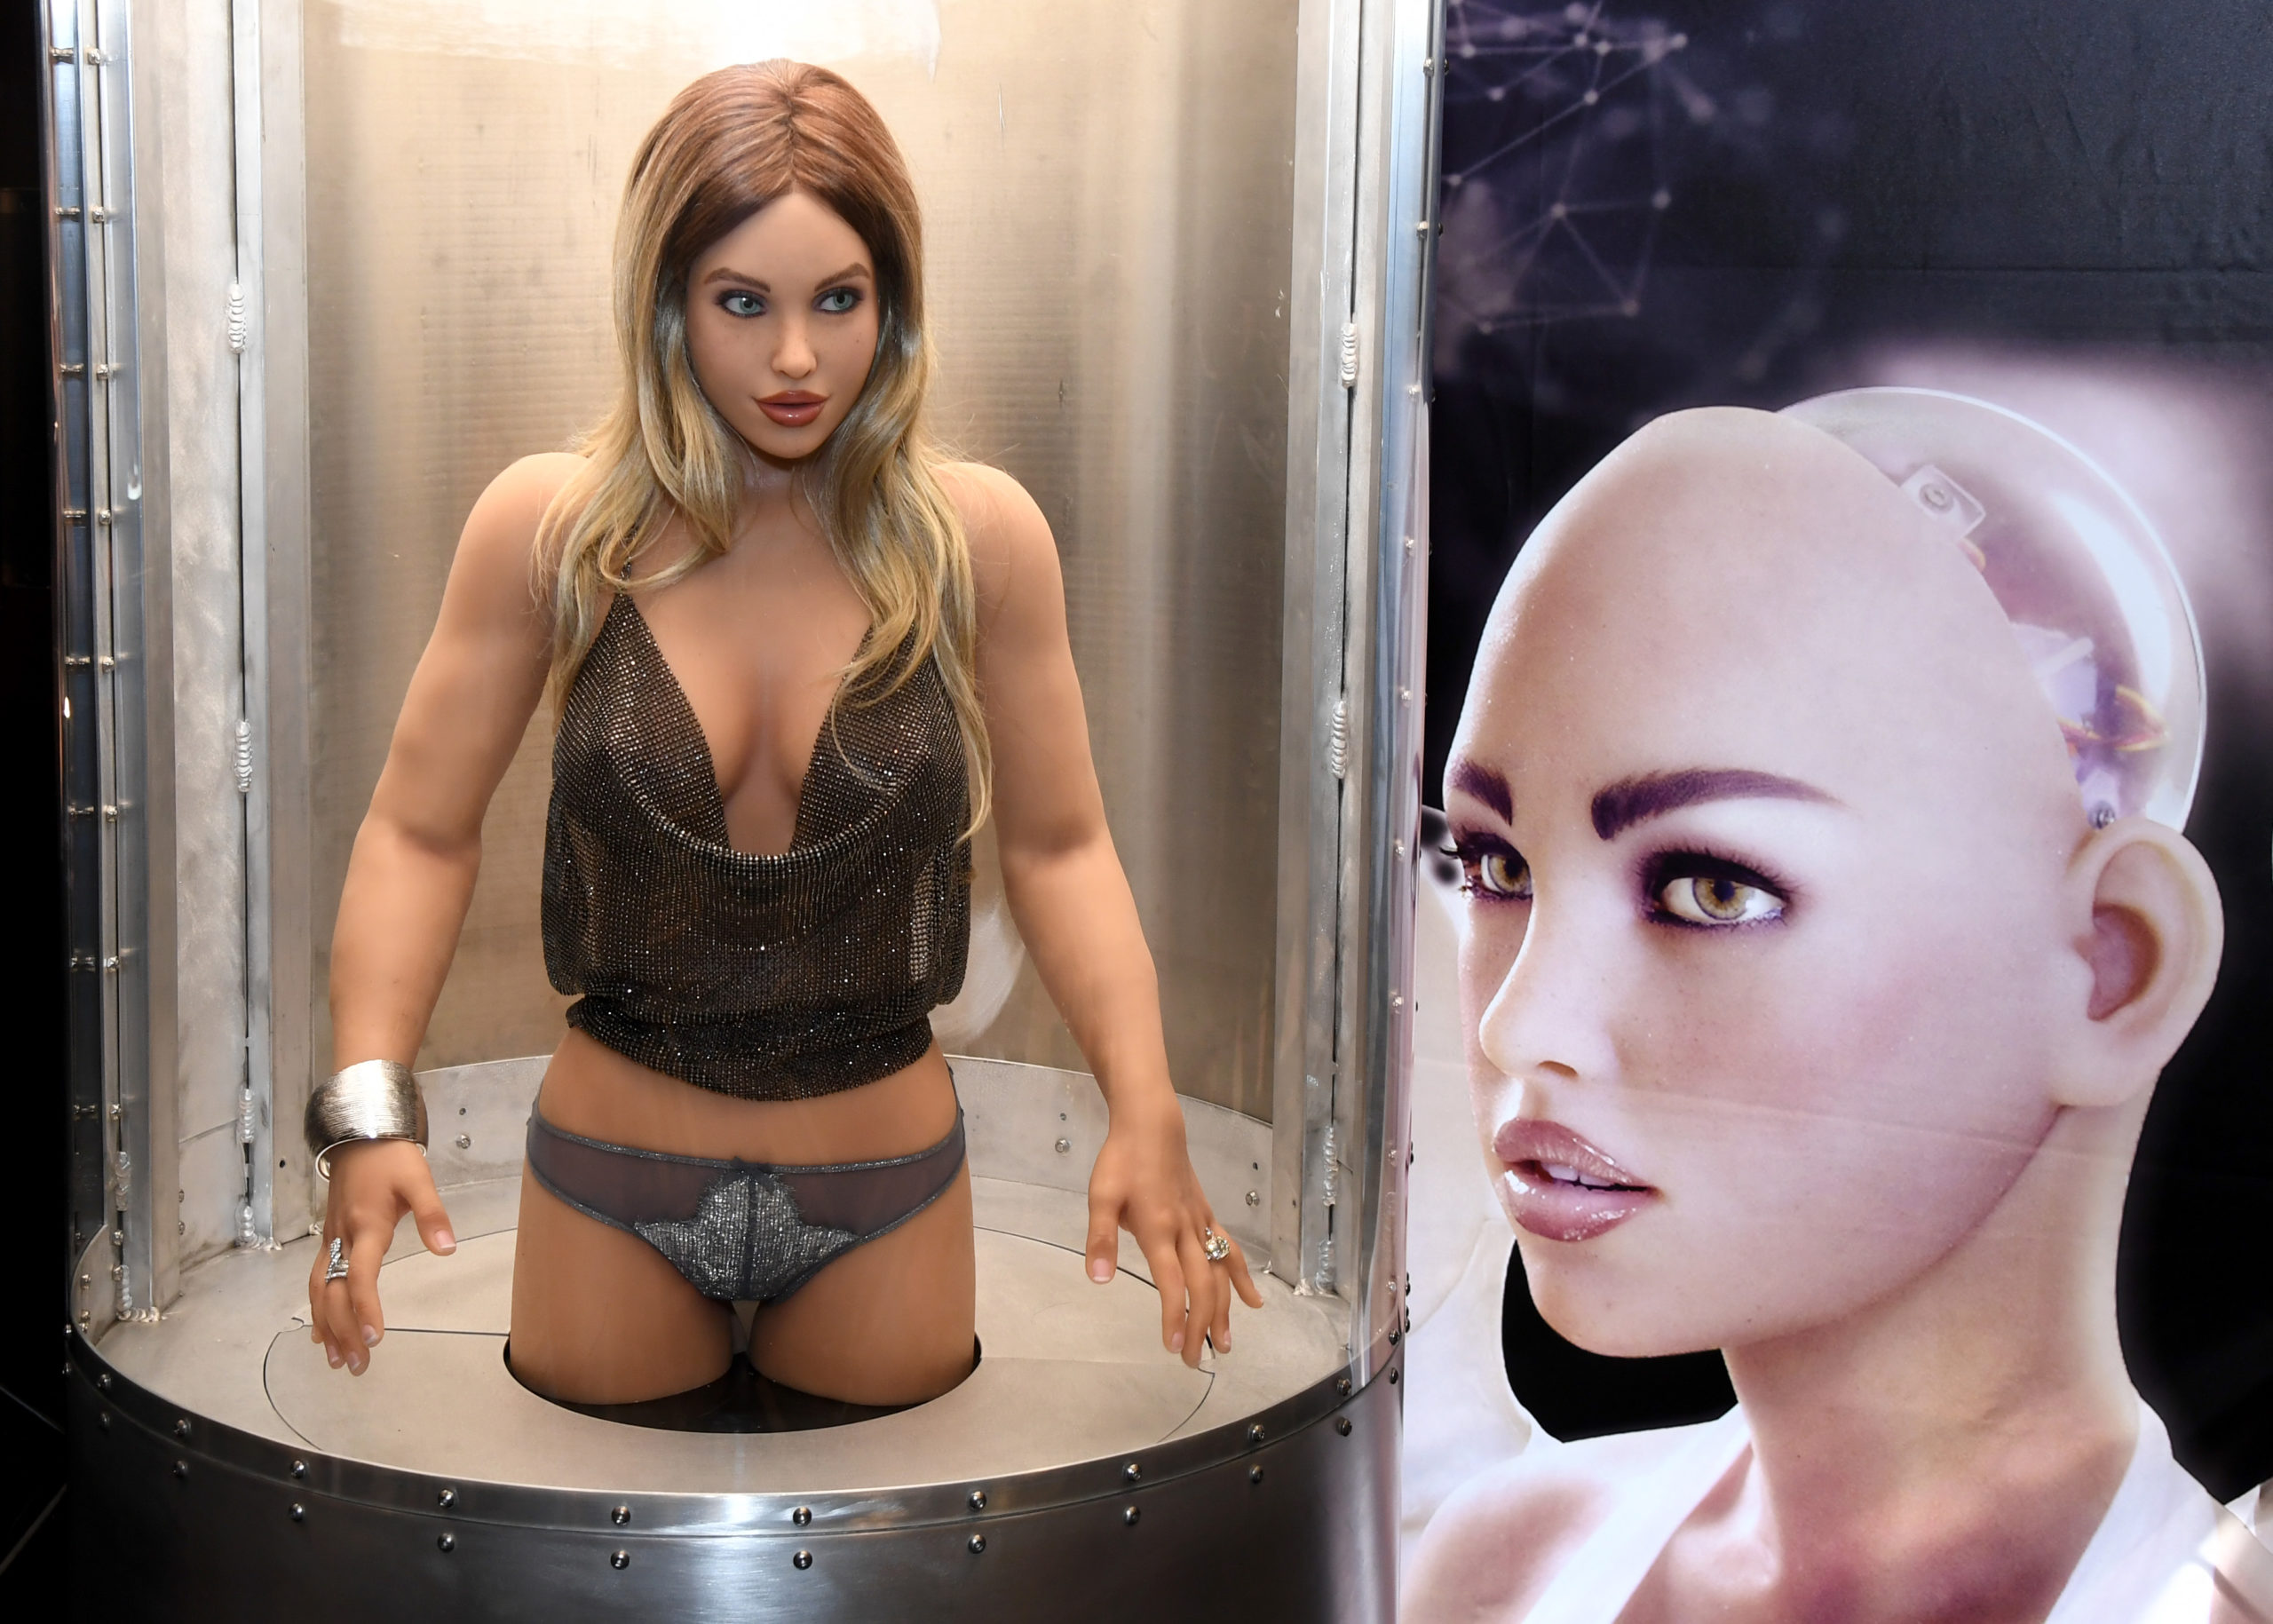 Sex robots in space would keep astronauts company, says PhD candidate